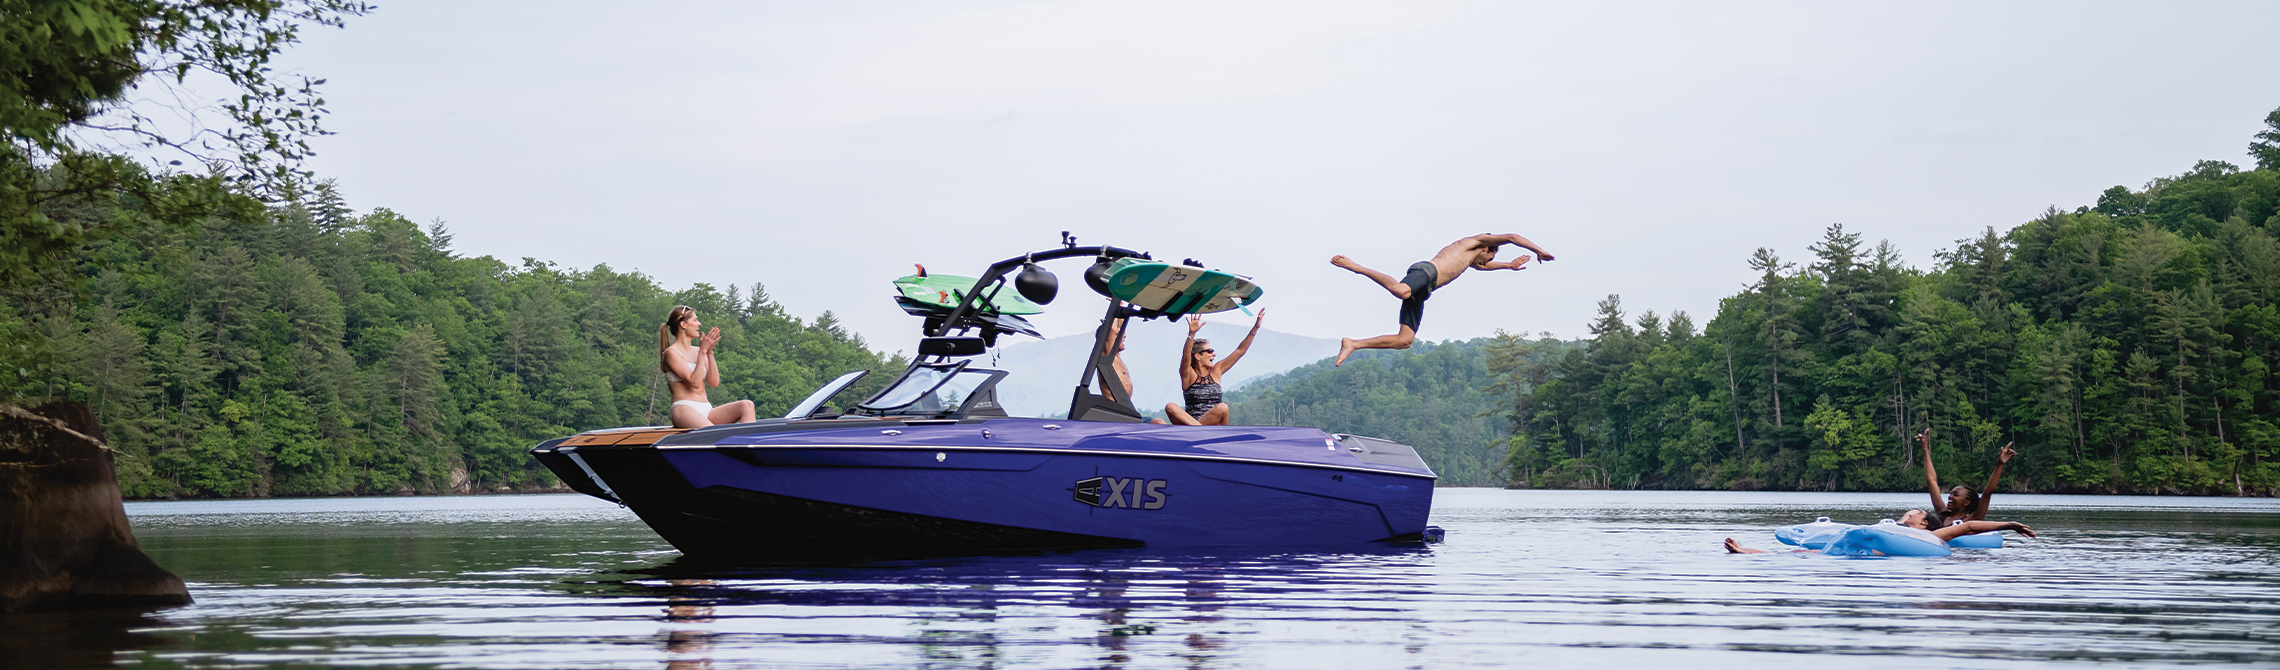 Boat Parts, Wakeboards